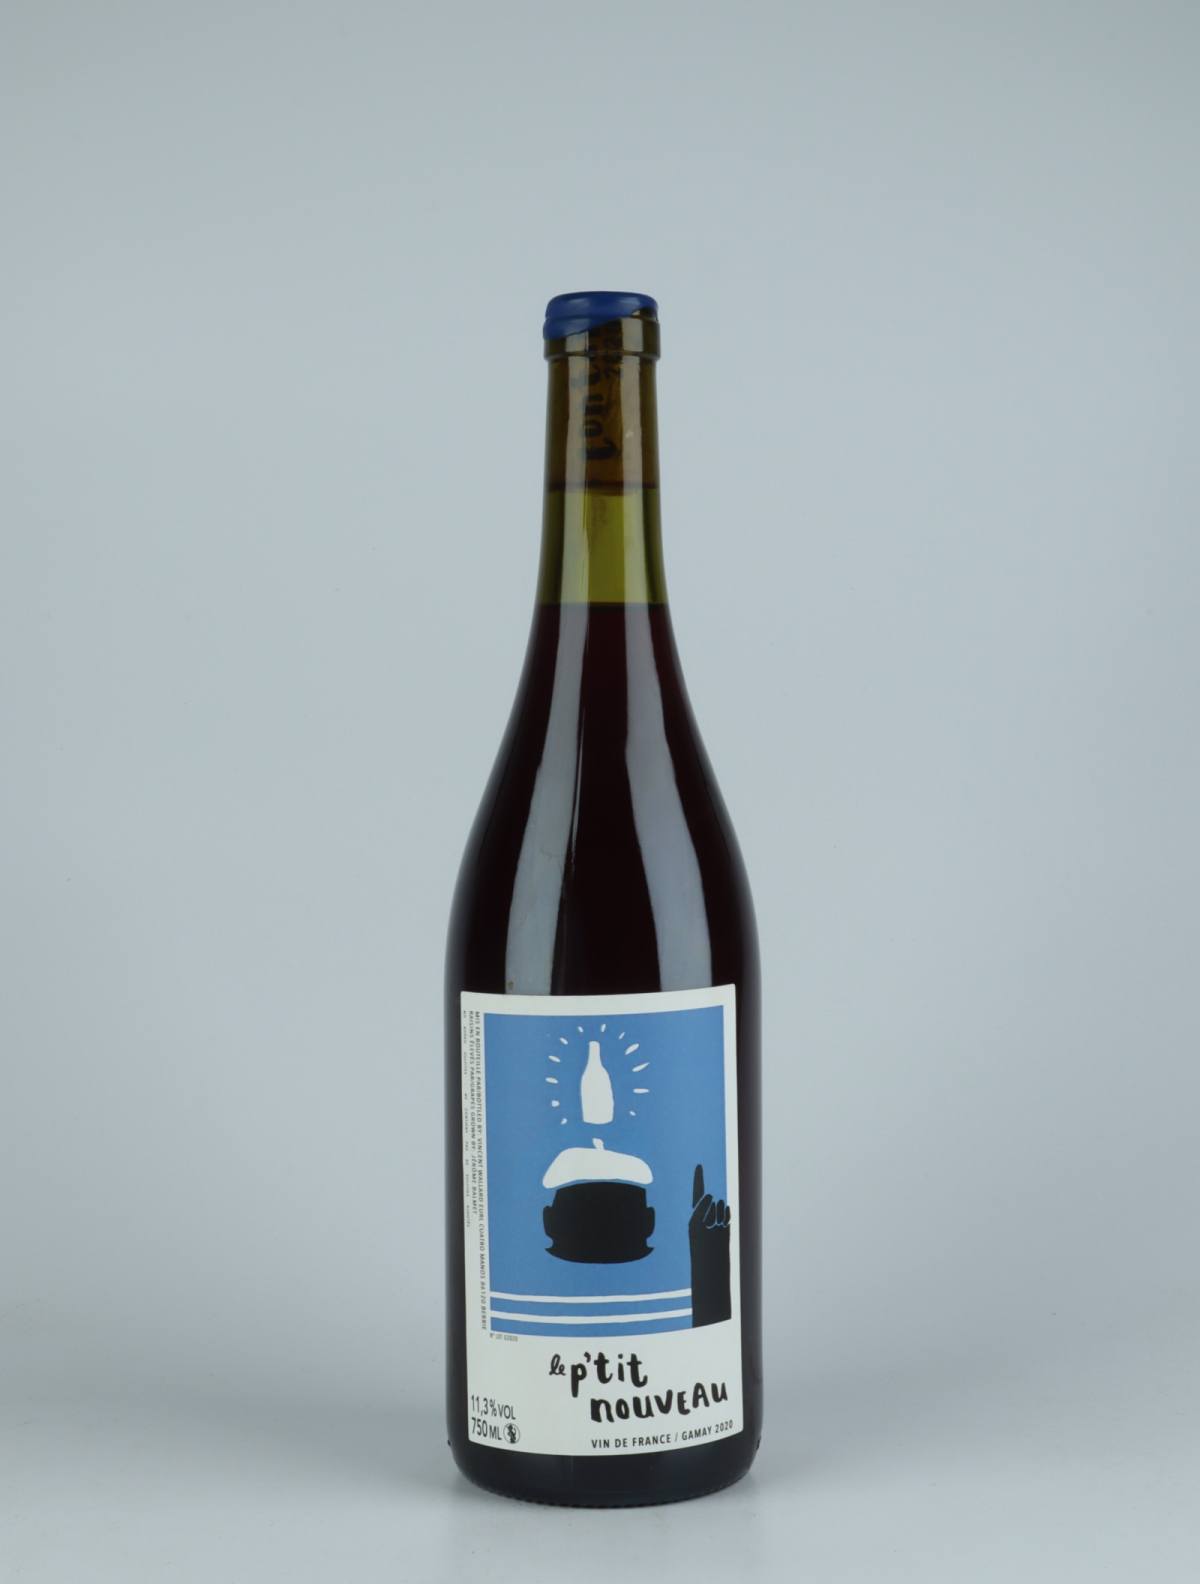 A bottle 2020 Petit Nouveau Gamay Red wine from Vincent Wallard, Loire in France